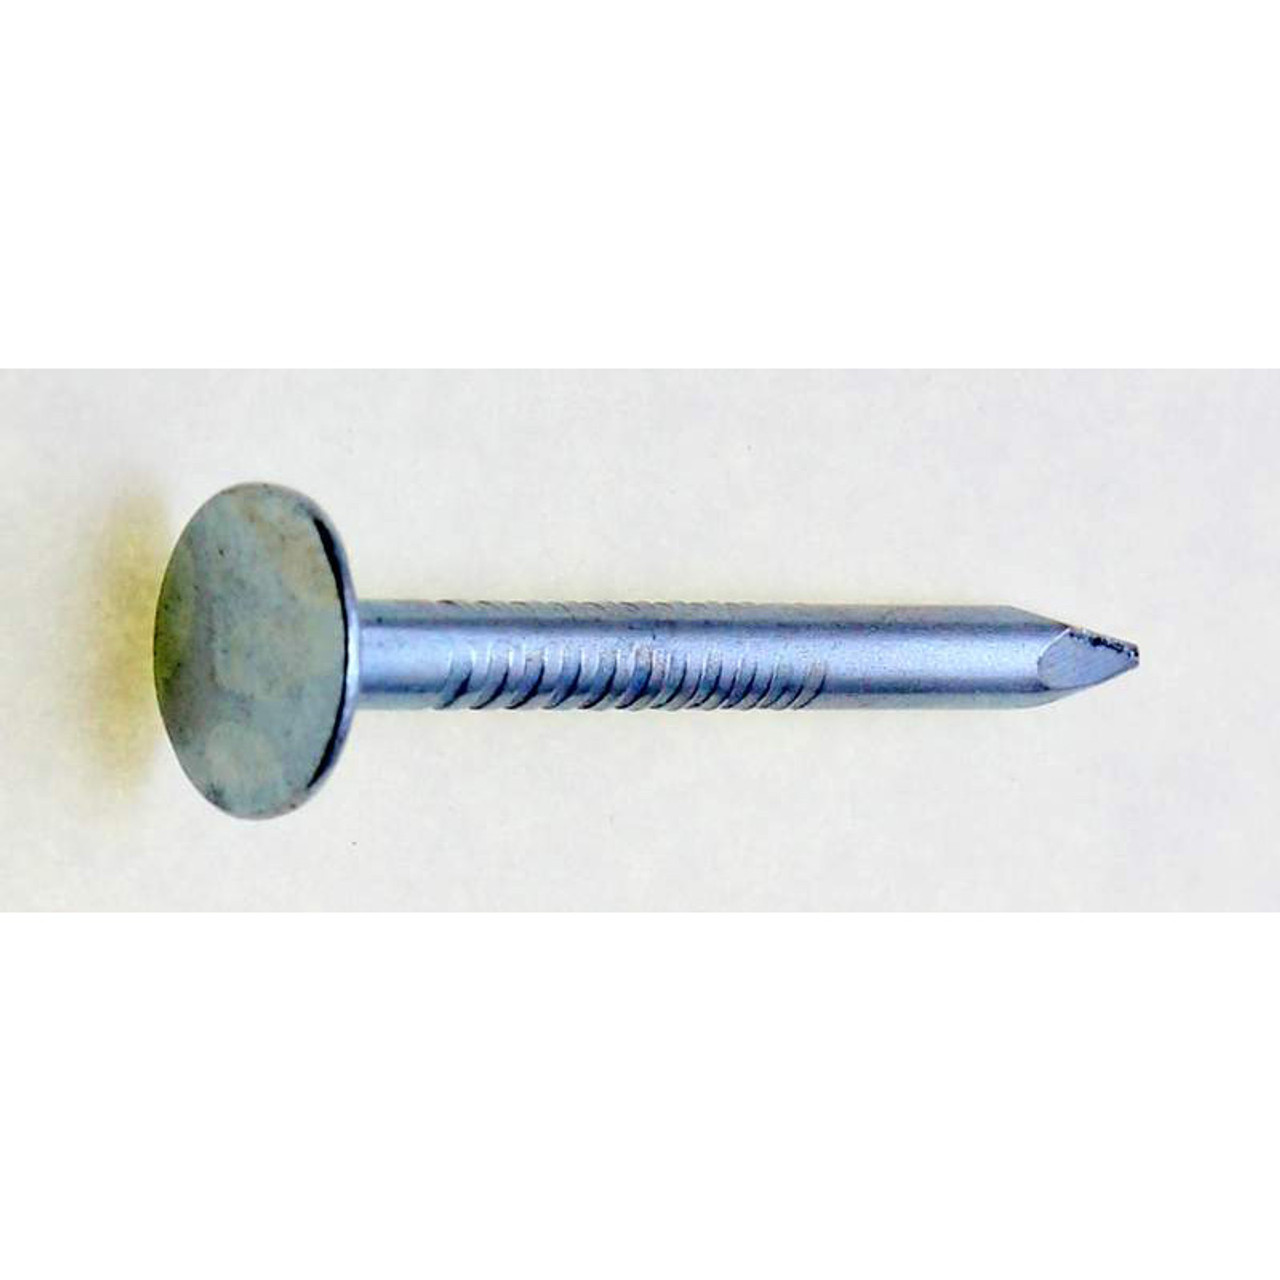 Stainless Steel Annular Ring Shank Roofing Nail 0.131 in. x 3/4 in. DYI  Project | eBay